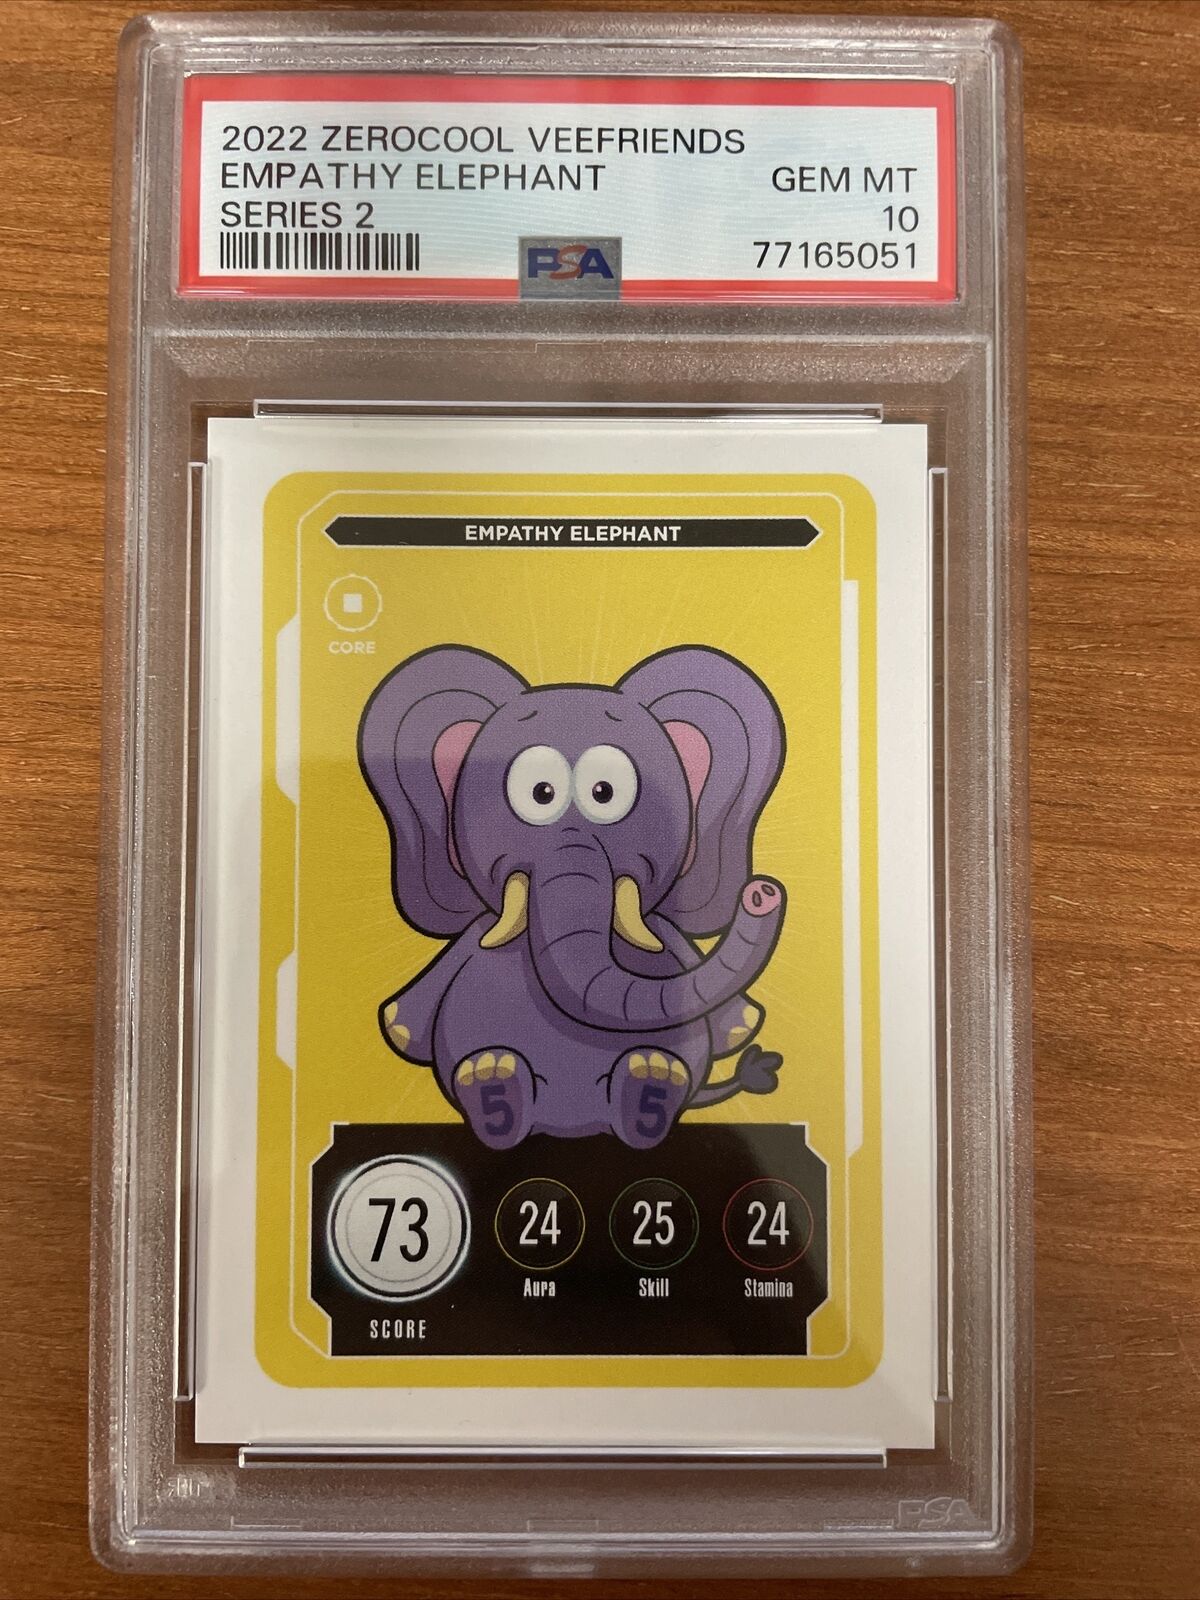 Empathy Elephant PSA 10 Veefriends Compete And Collect Series 2 Gary Vee